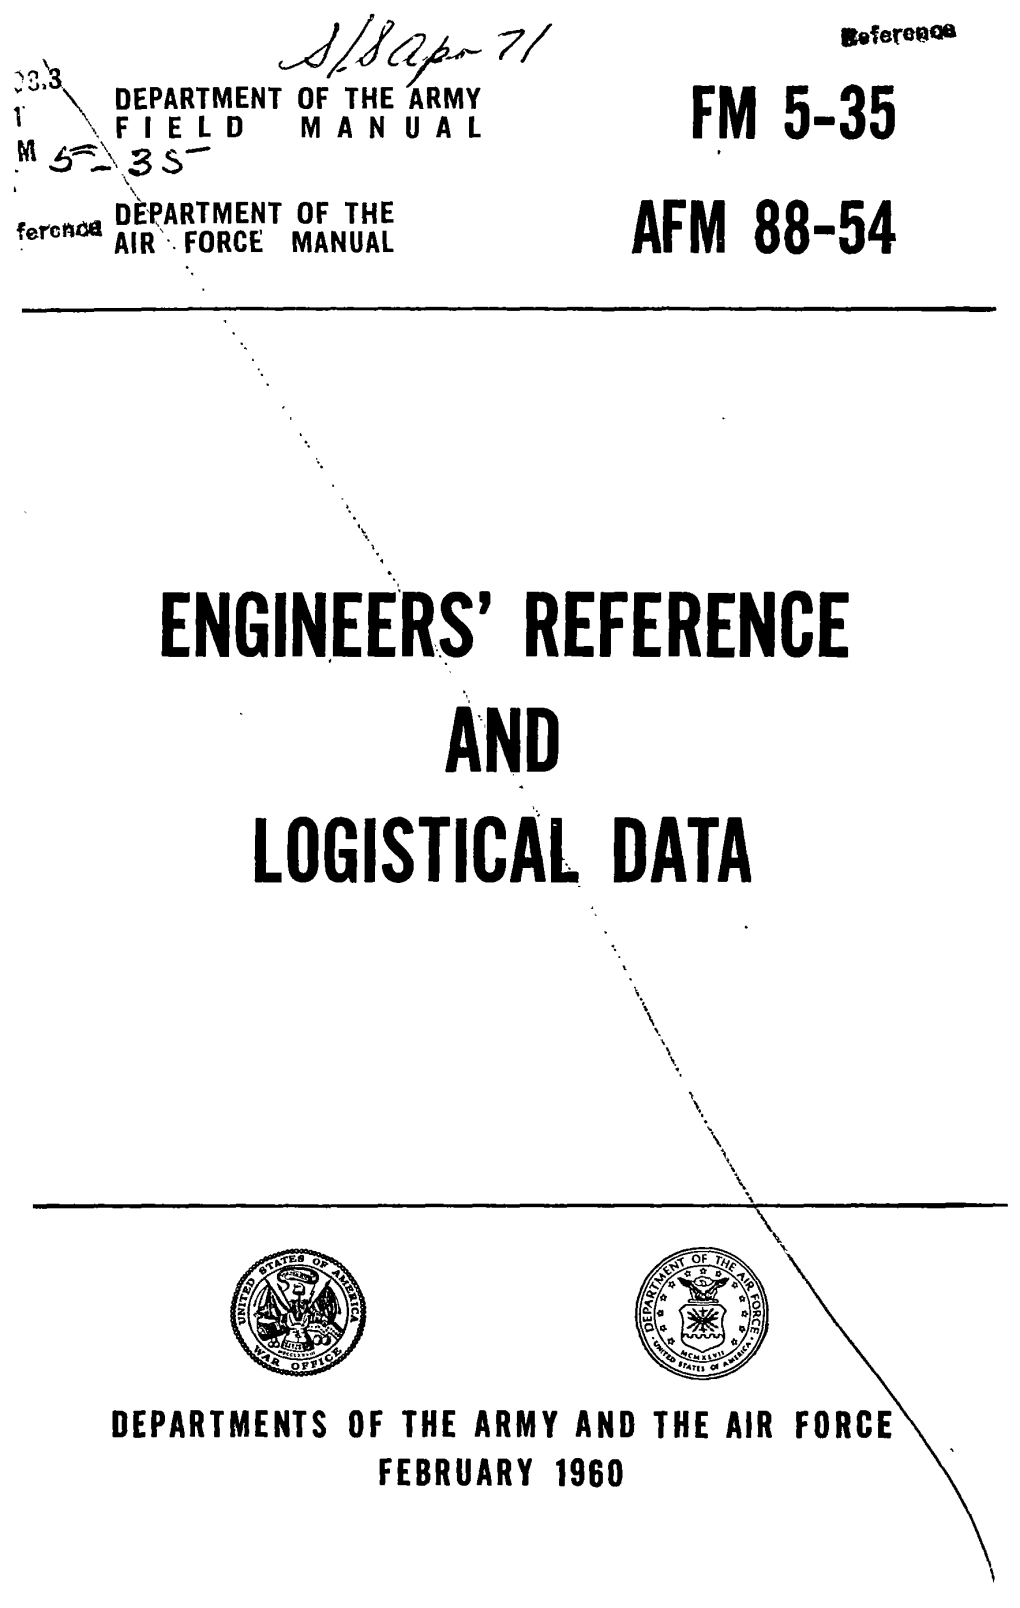 Engineers, Reference and Logistical Data